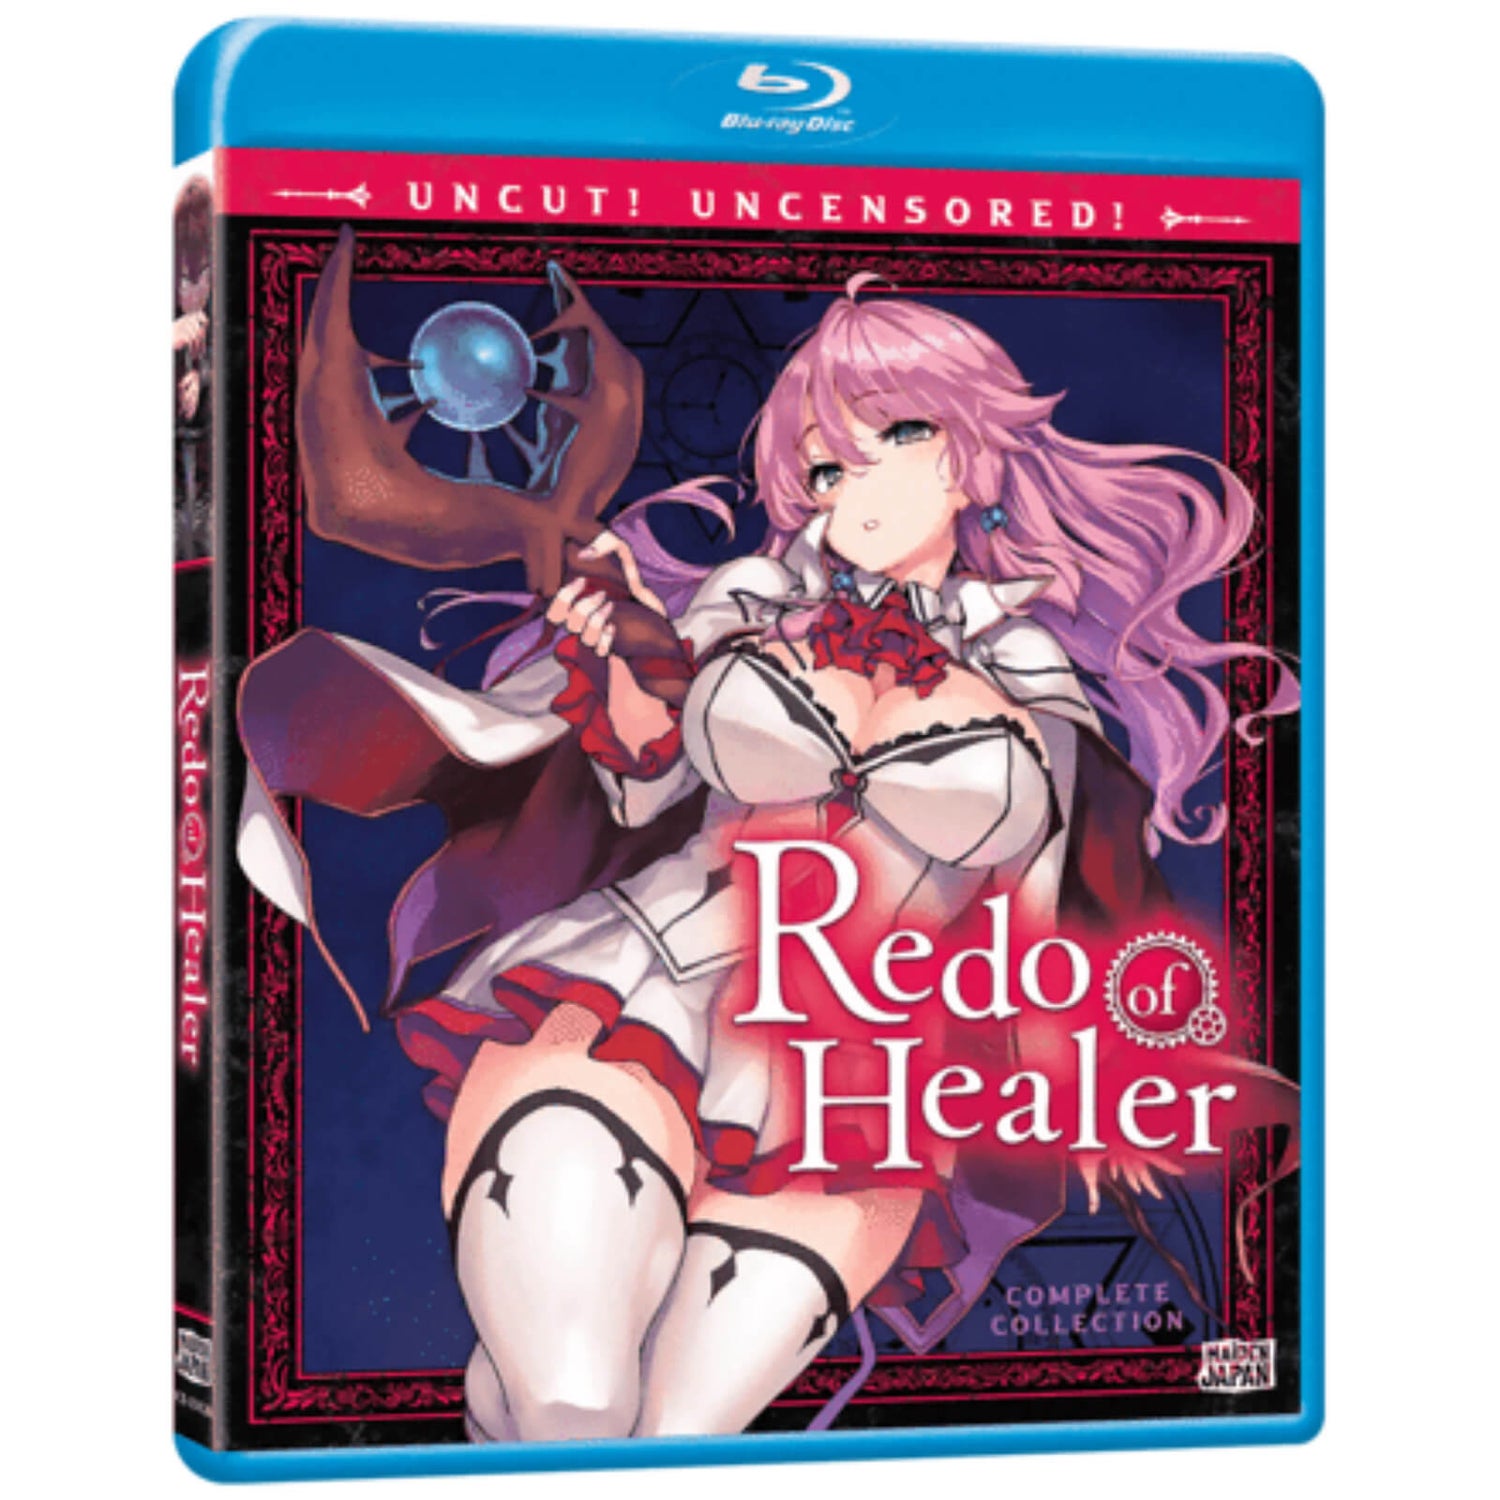 Redo of Healer Complete Collection Blu-ray Anime Review